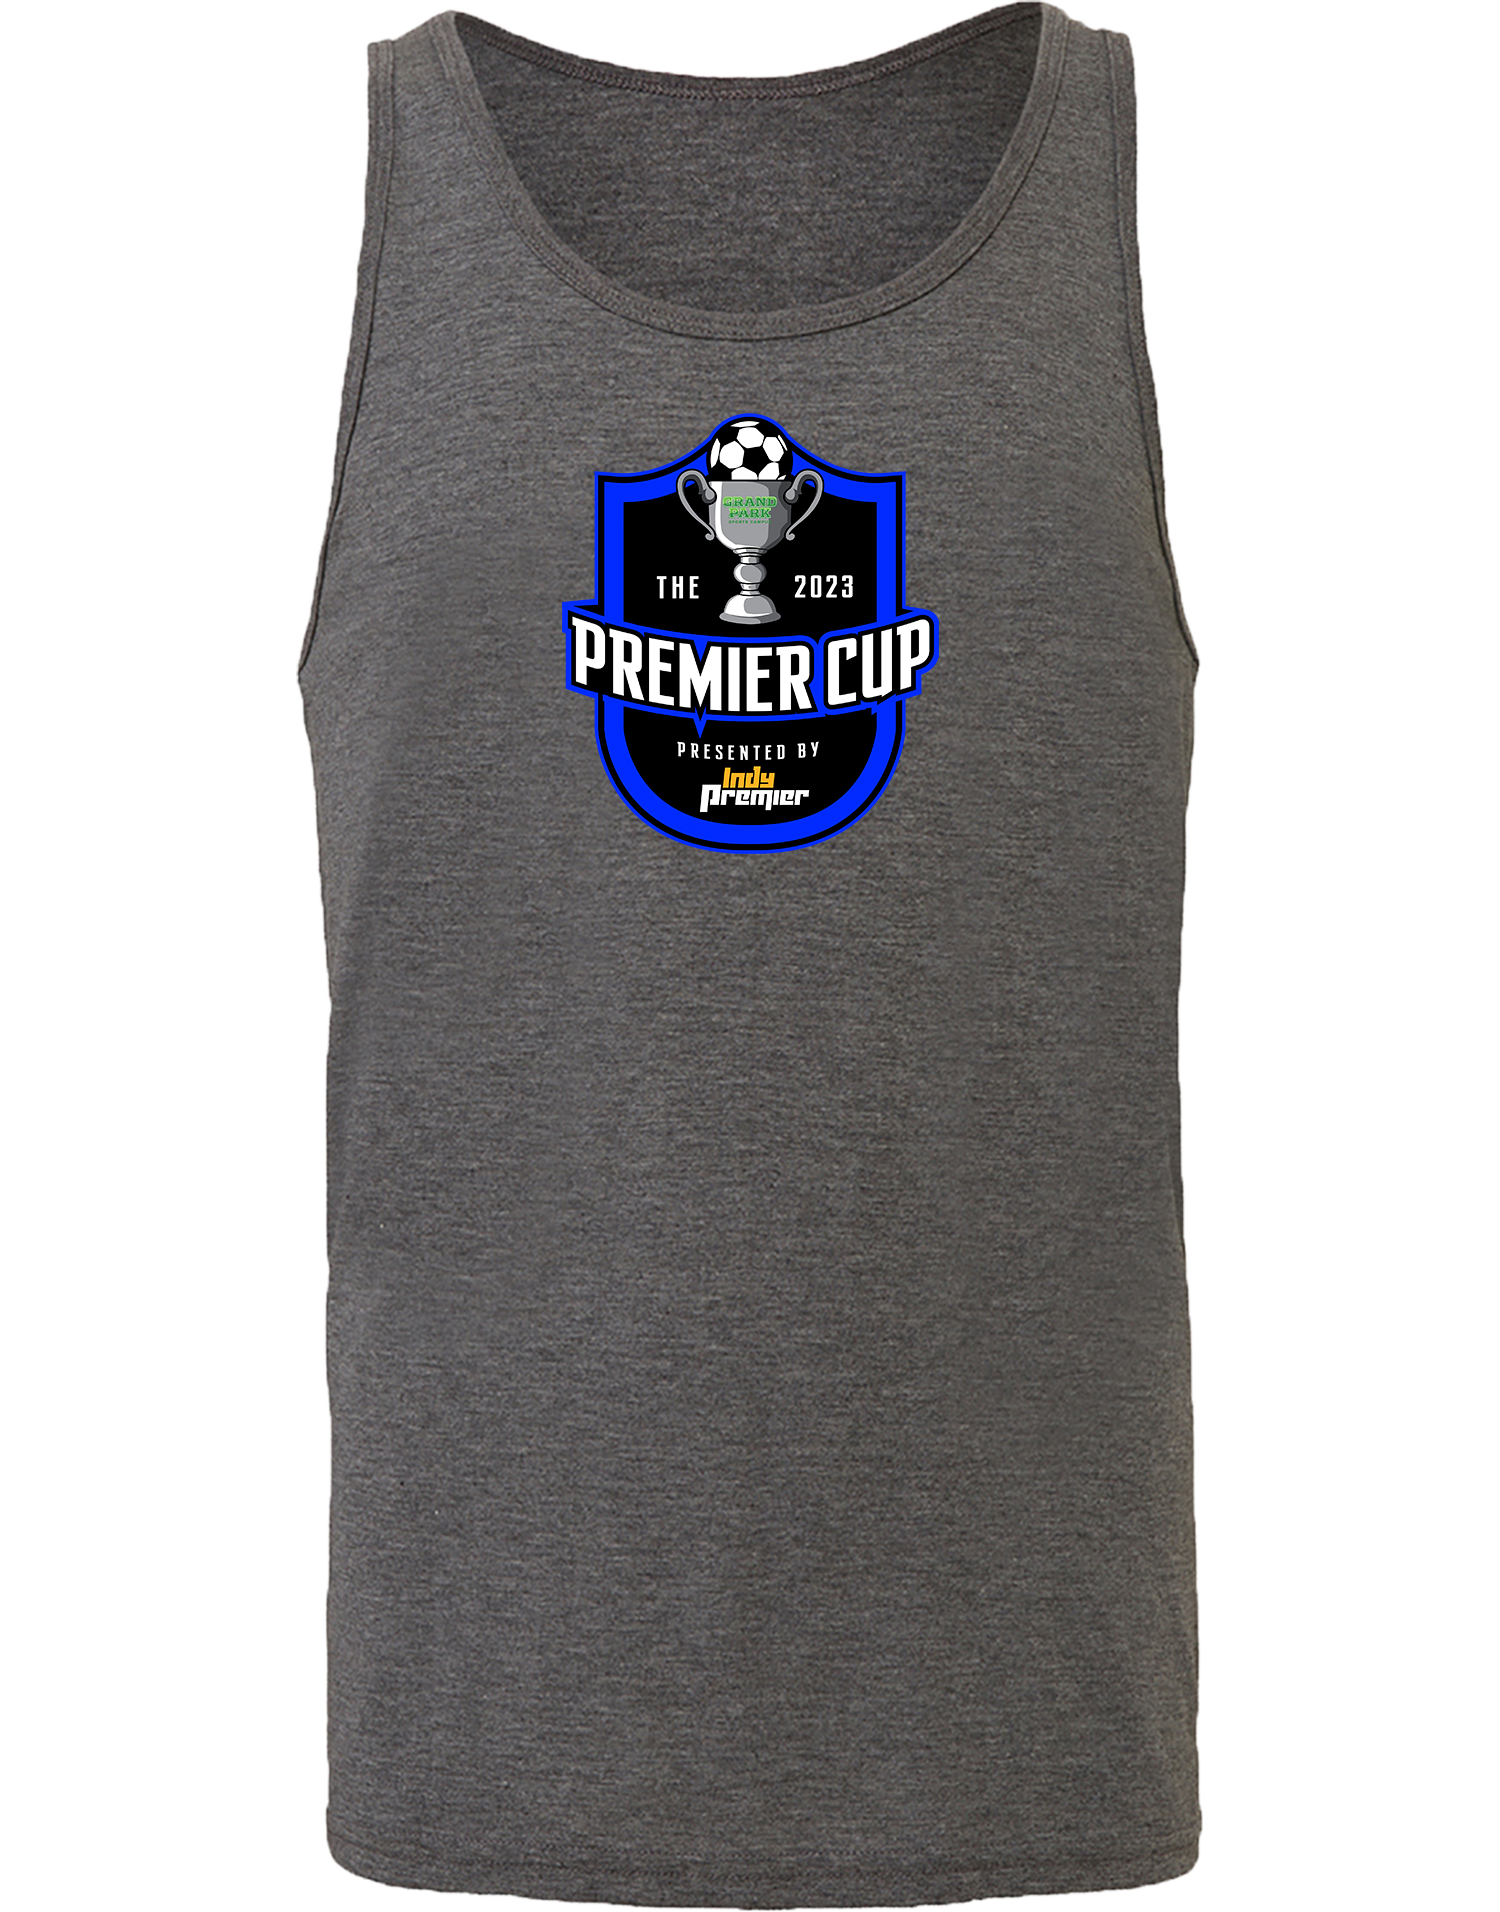 TANK TOP - 2023 The Premier Cup presented by Indy Premier